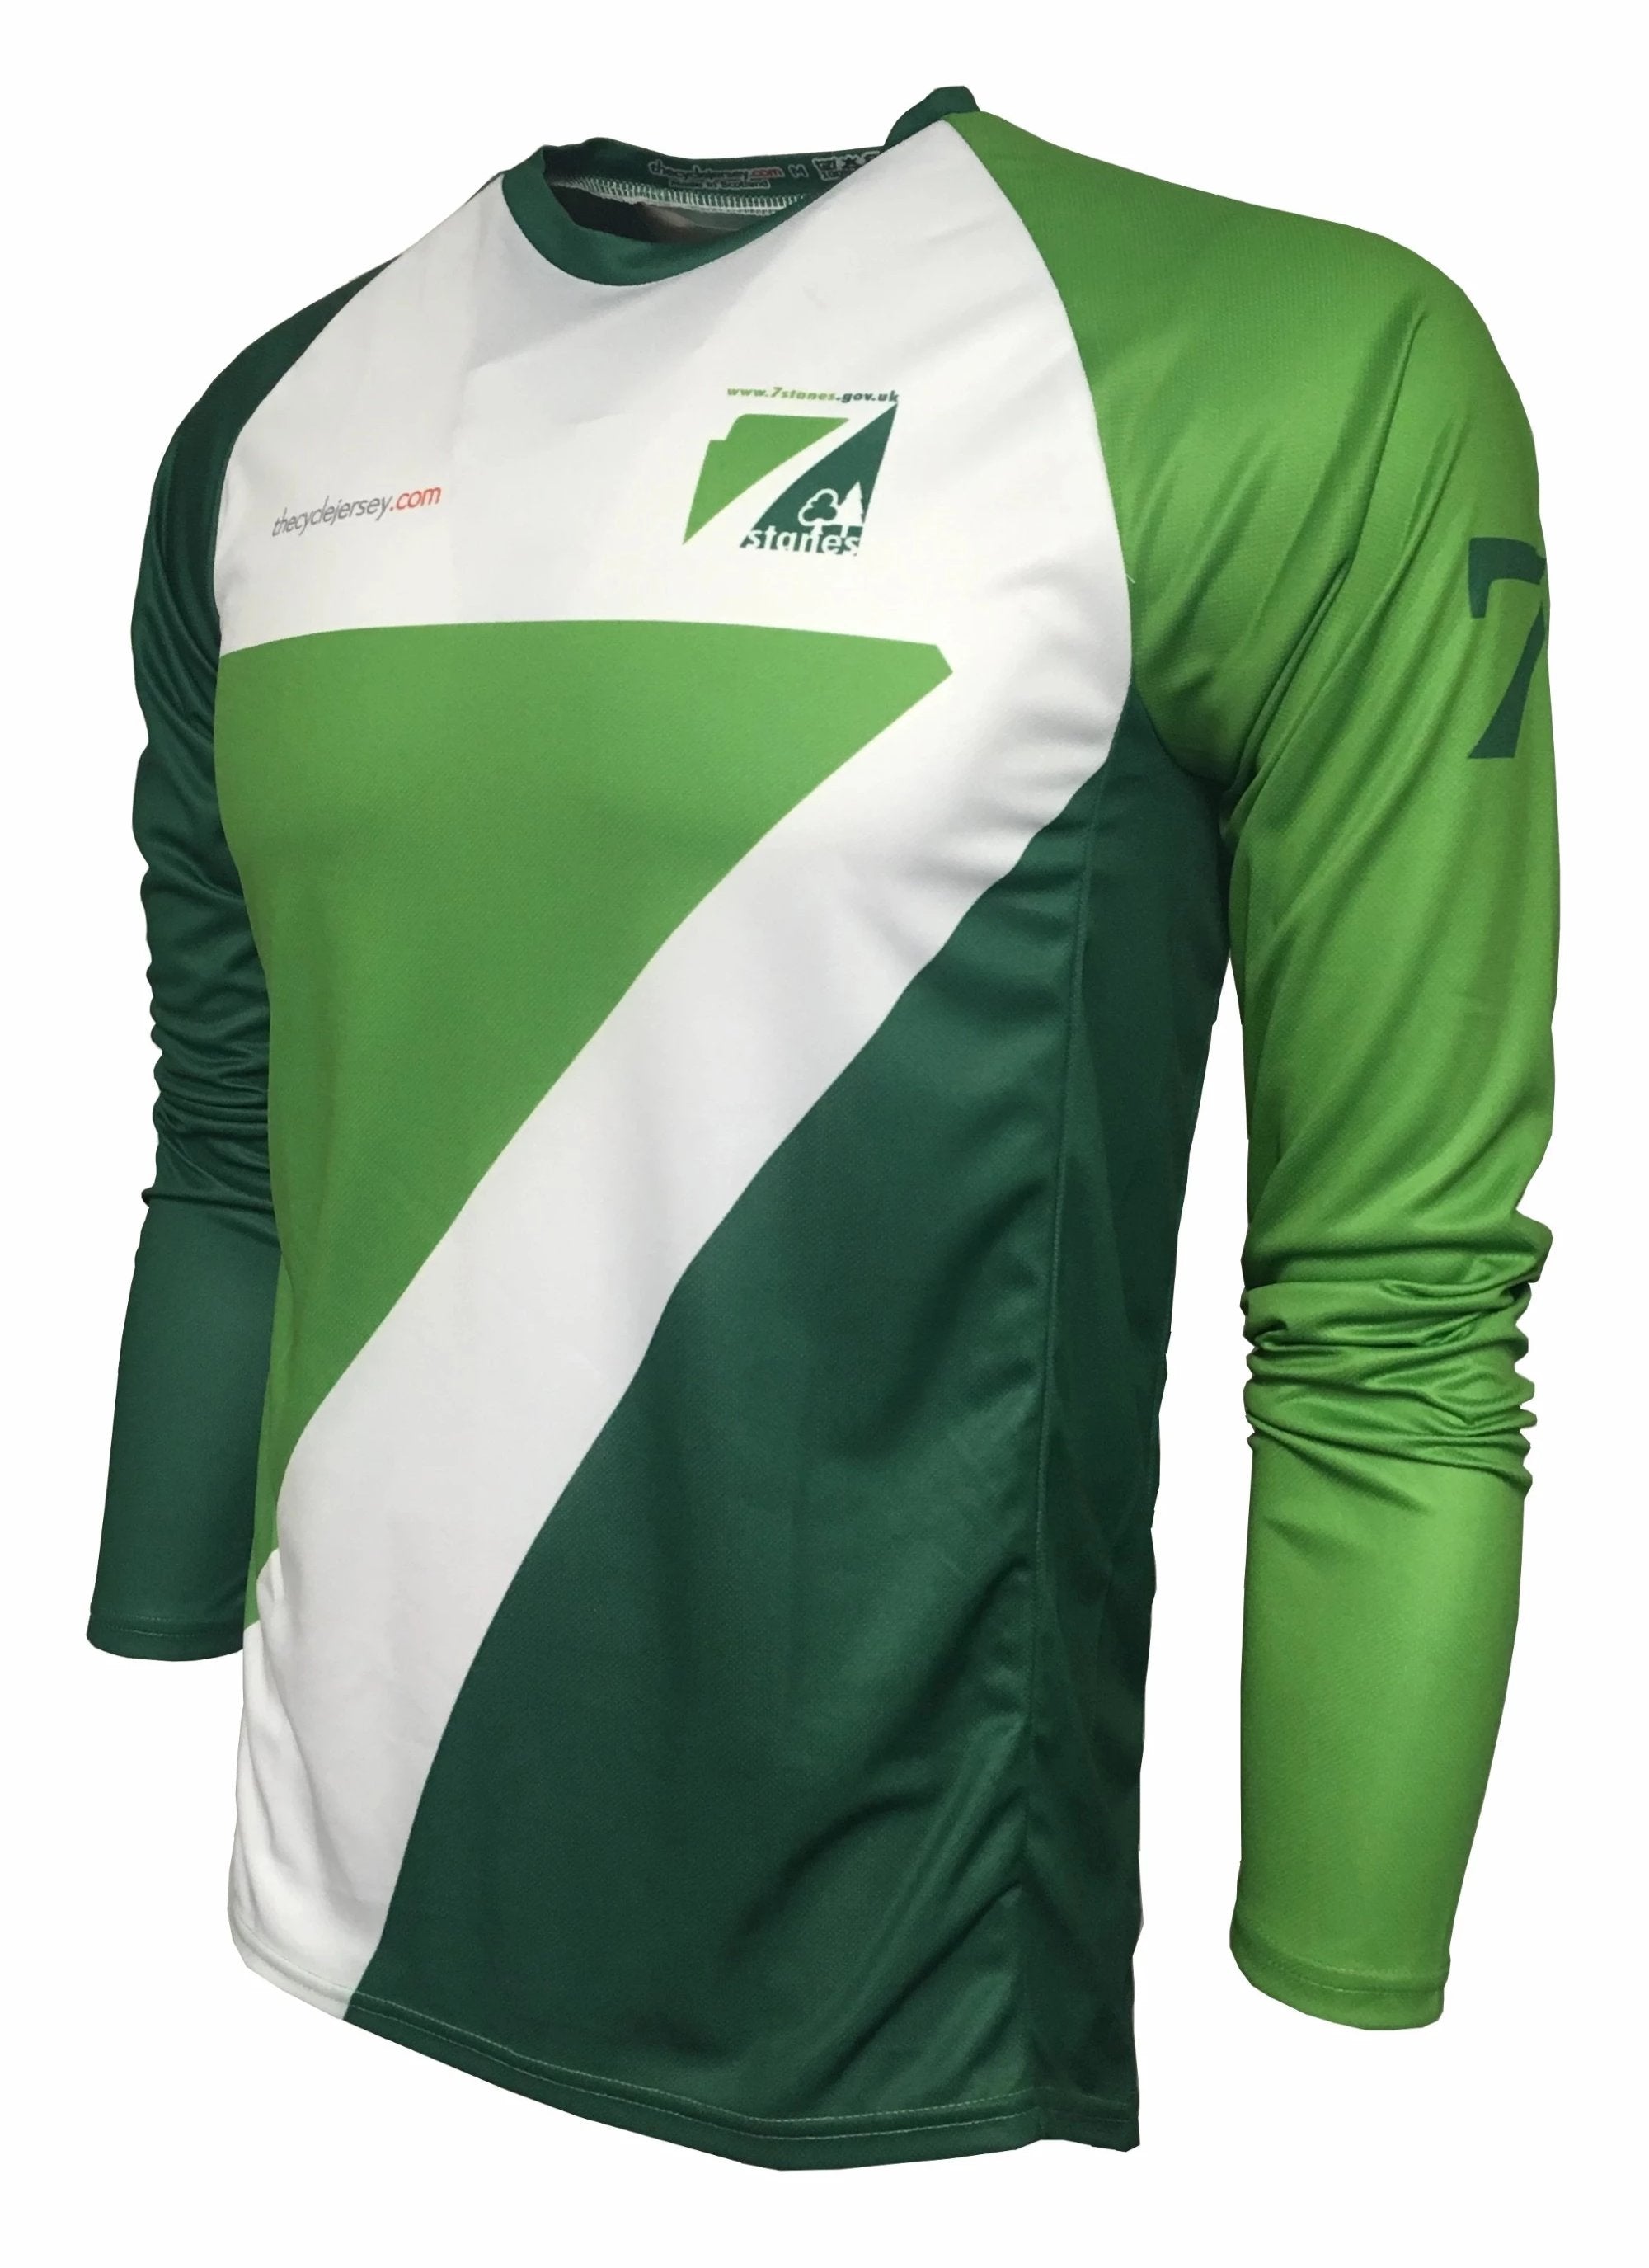 7Stanes Classic Enduro Cycling Jersey Front